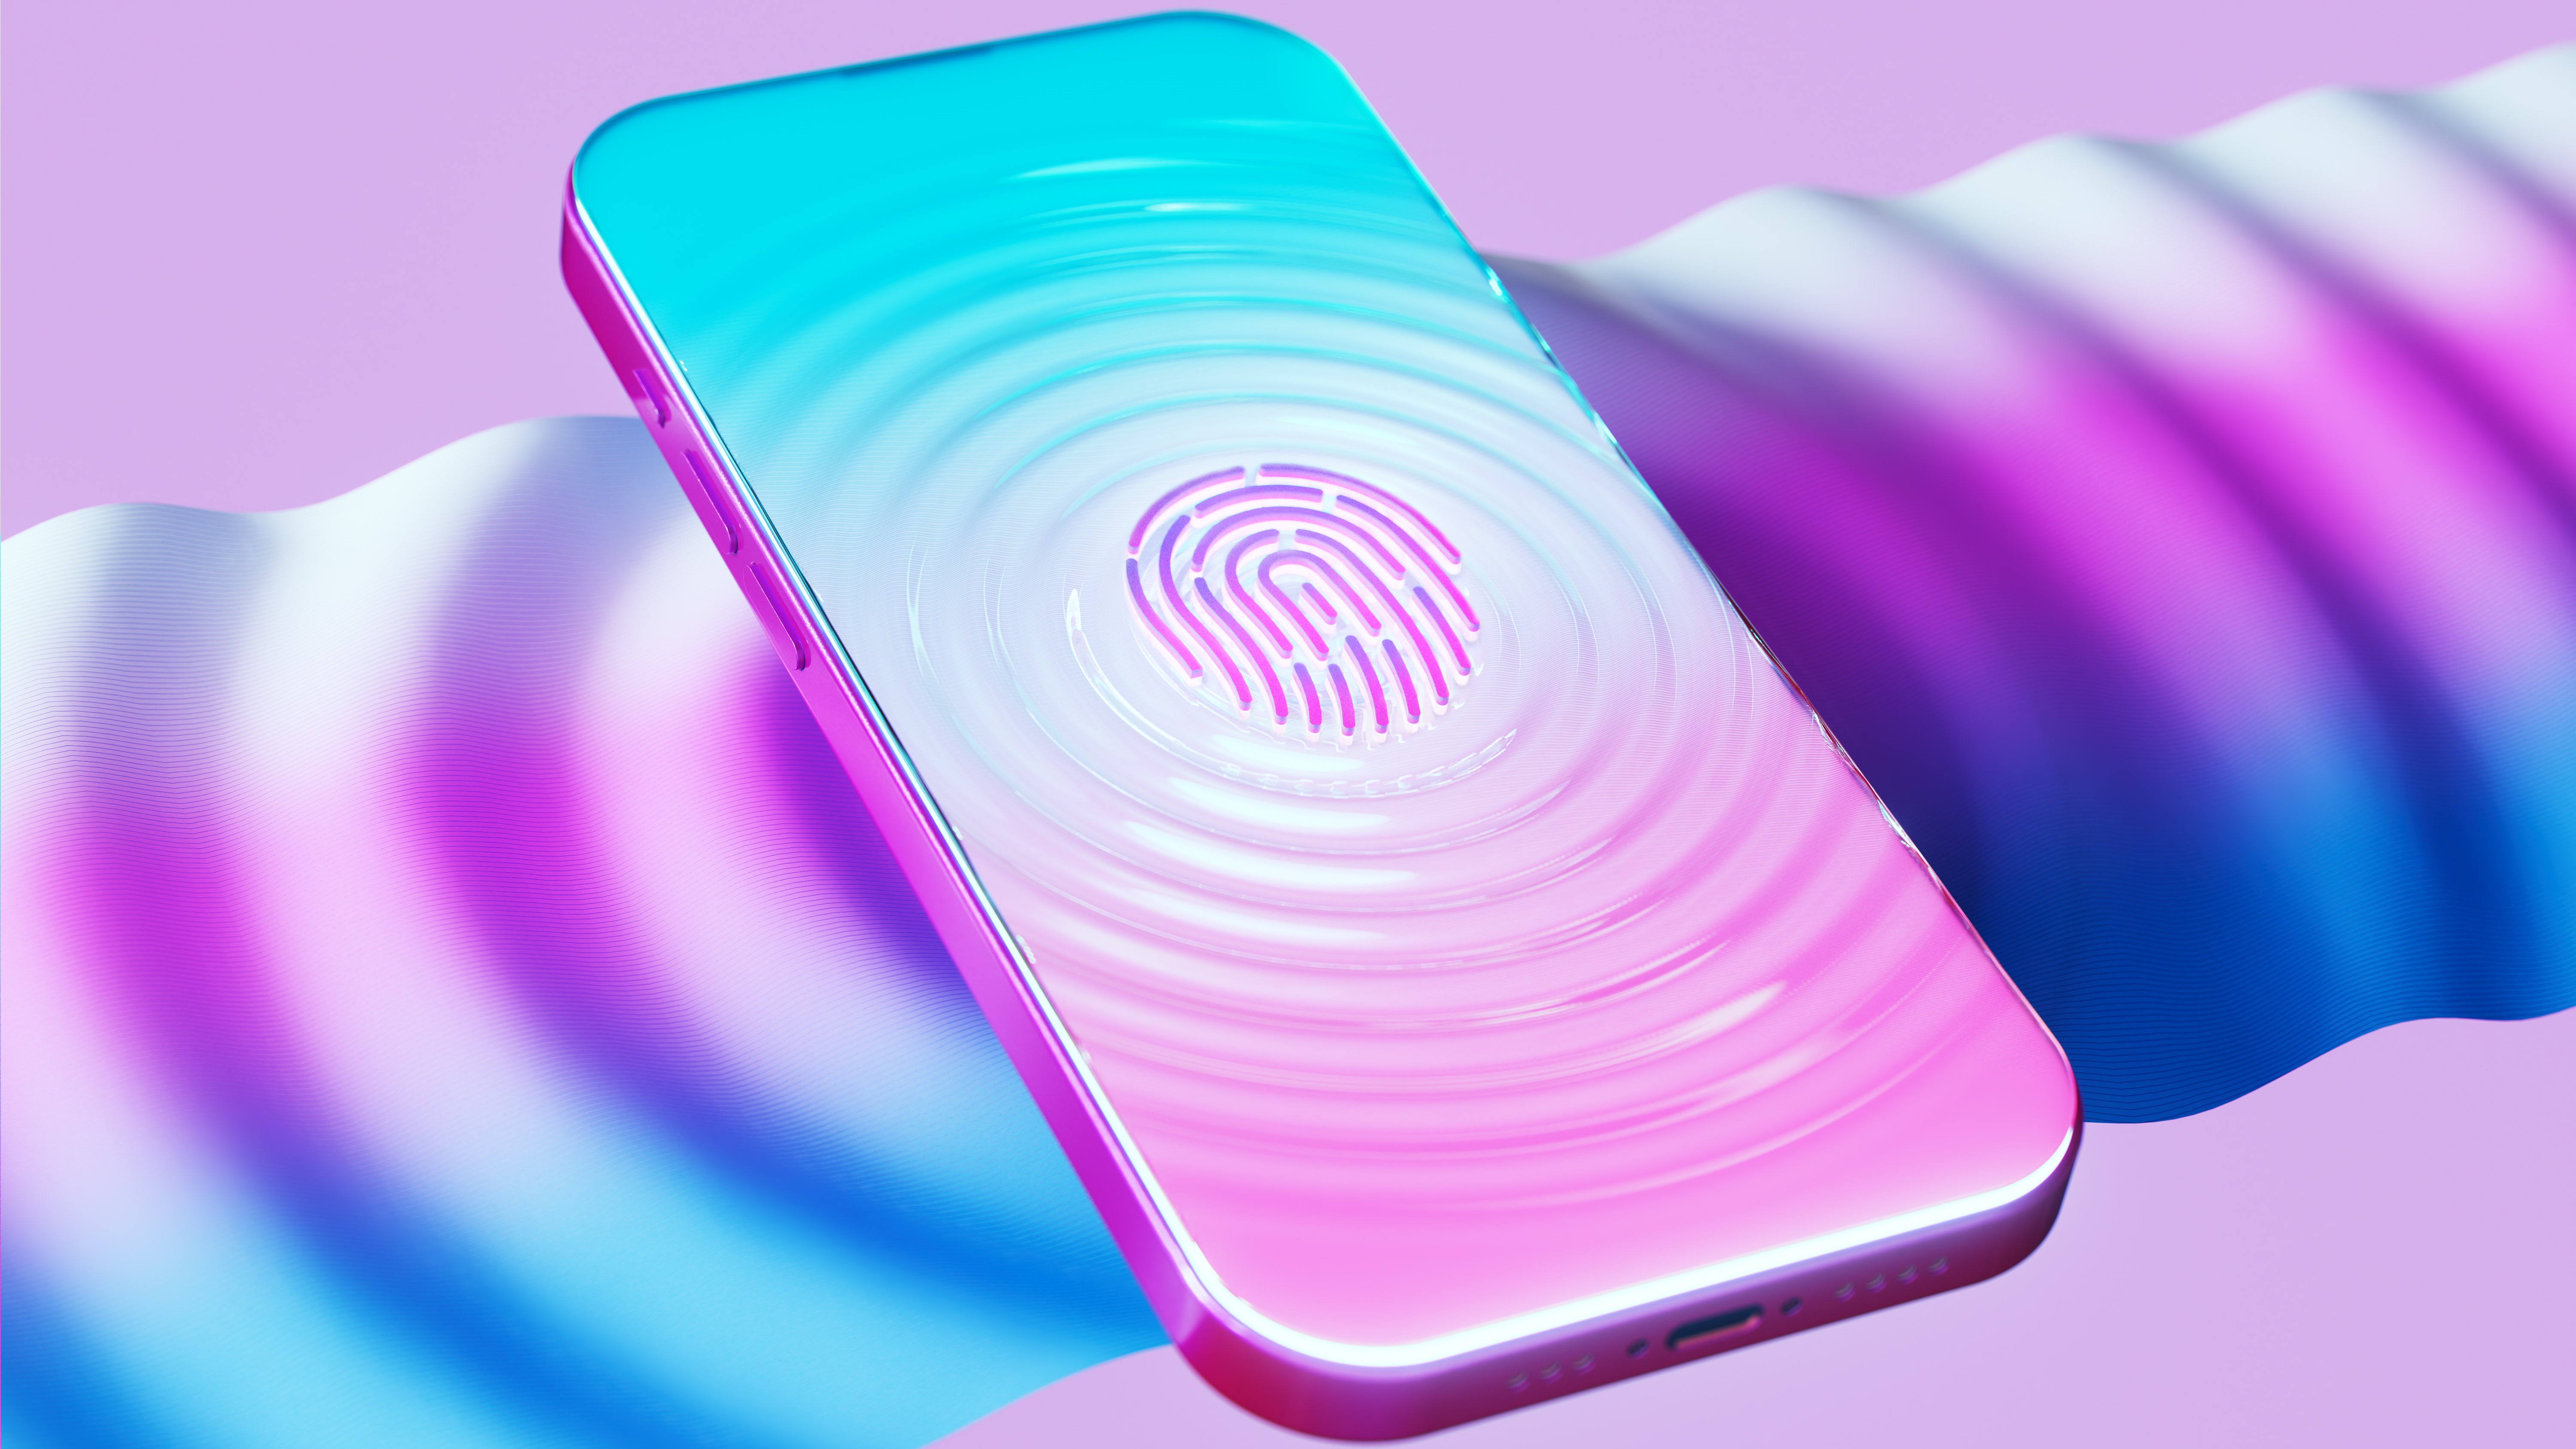 Digital generated image of smartphone display with a futuristic biometric fingerprint authentication system